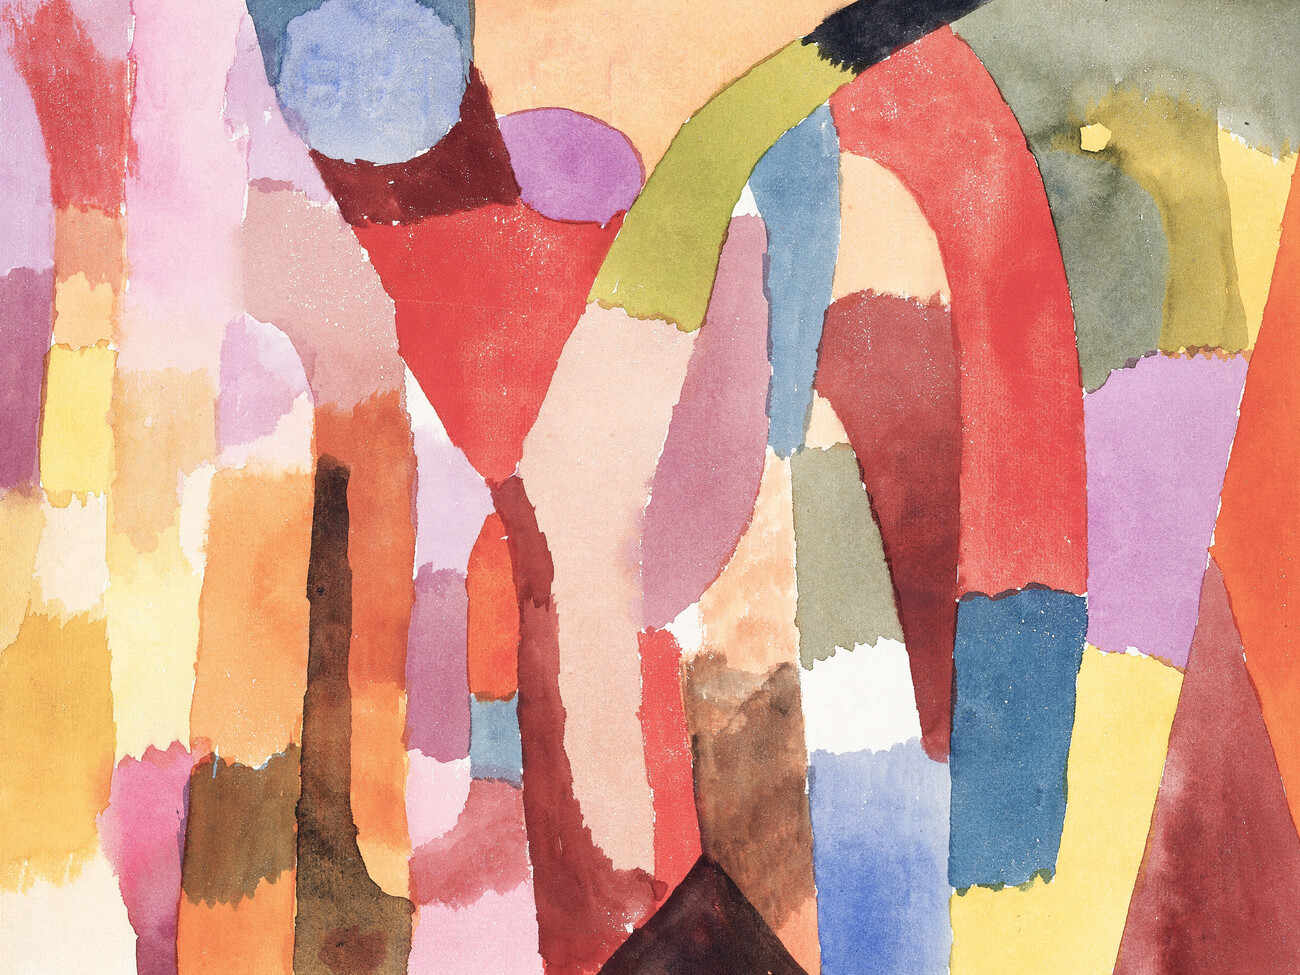 Wallpaper Mural Movement of Vaulted Chambers - Paul Klee